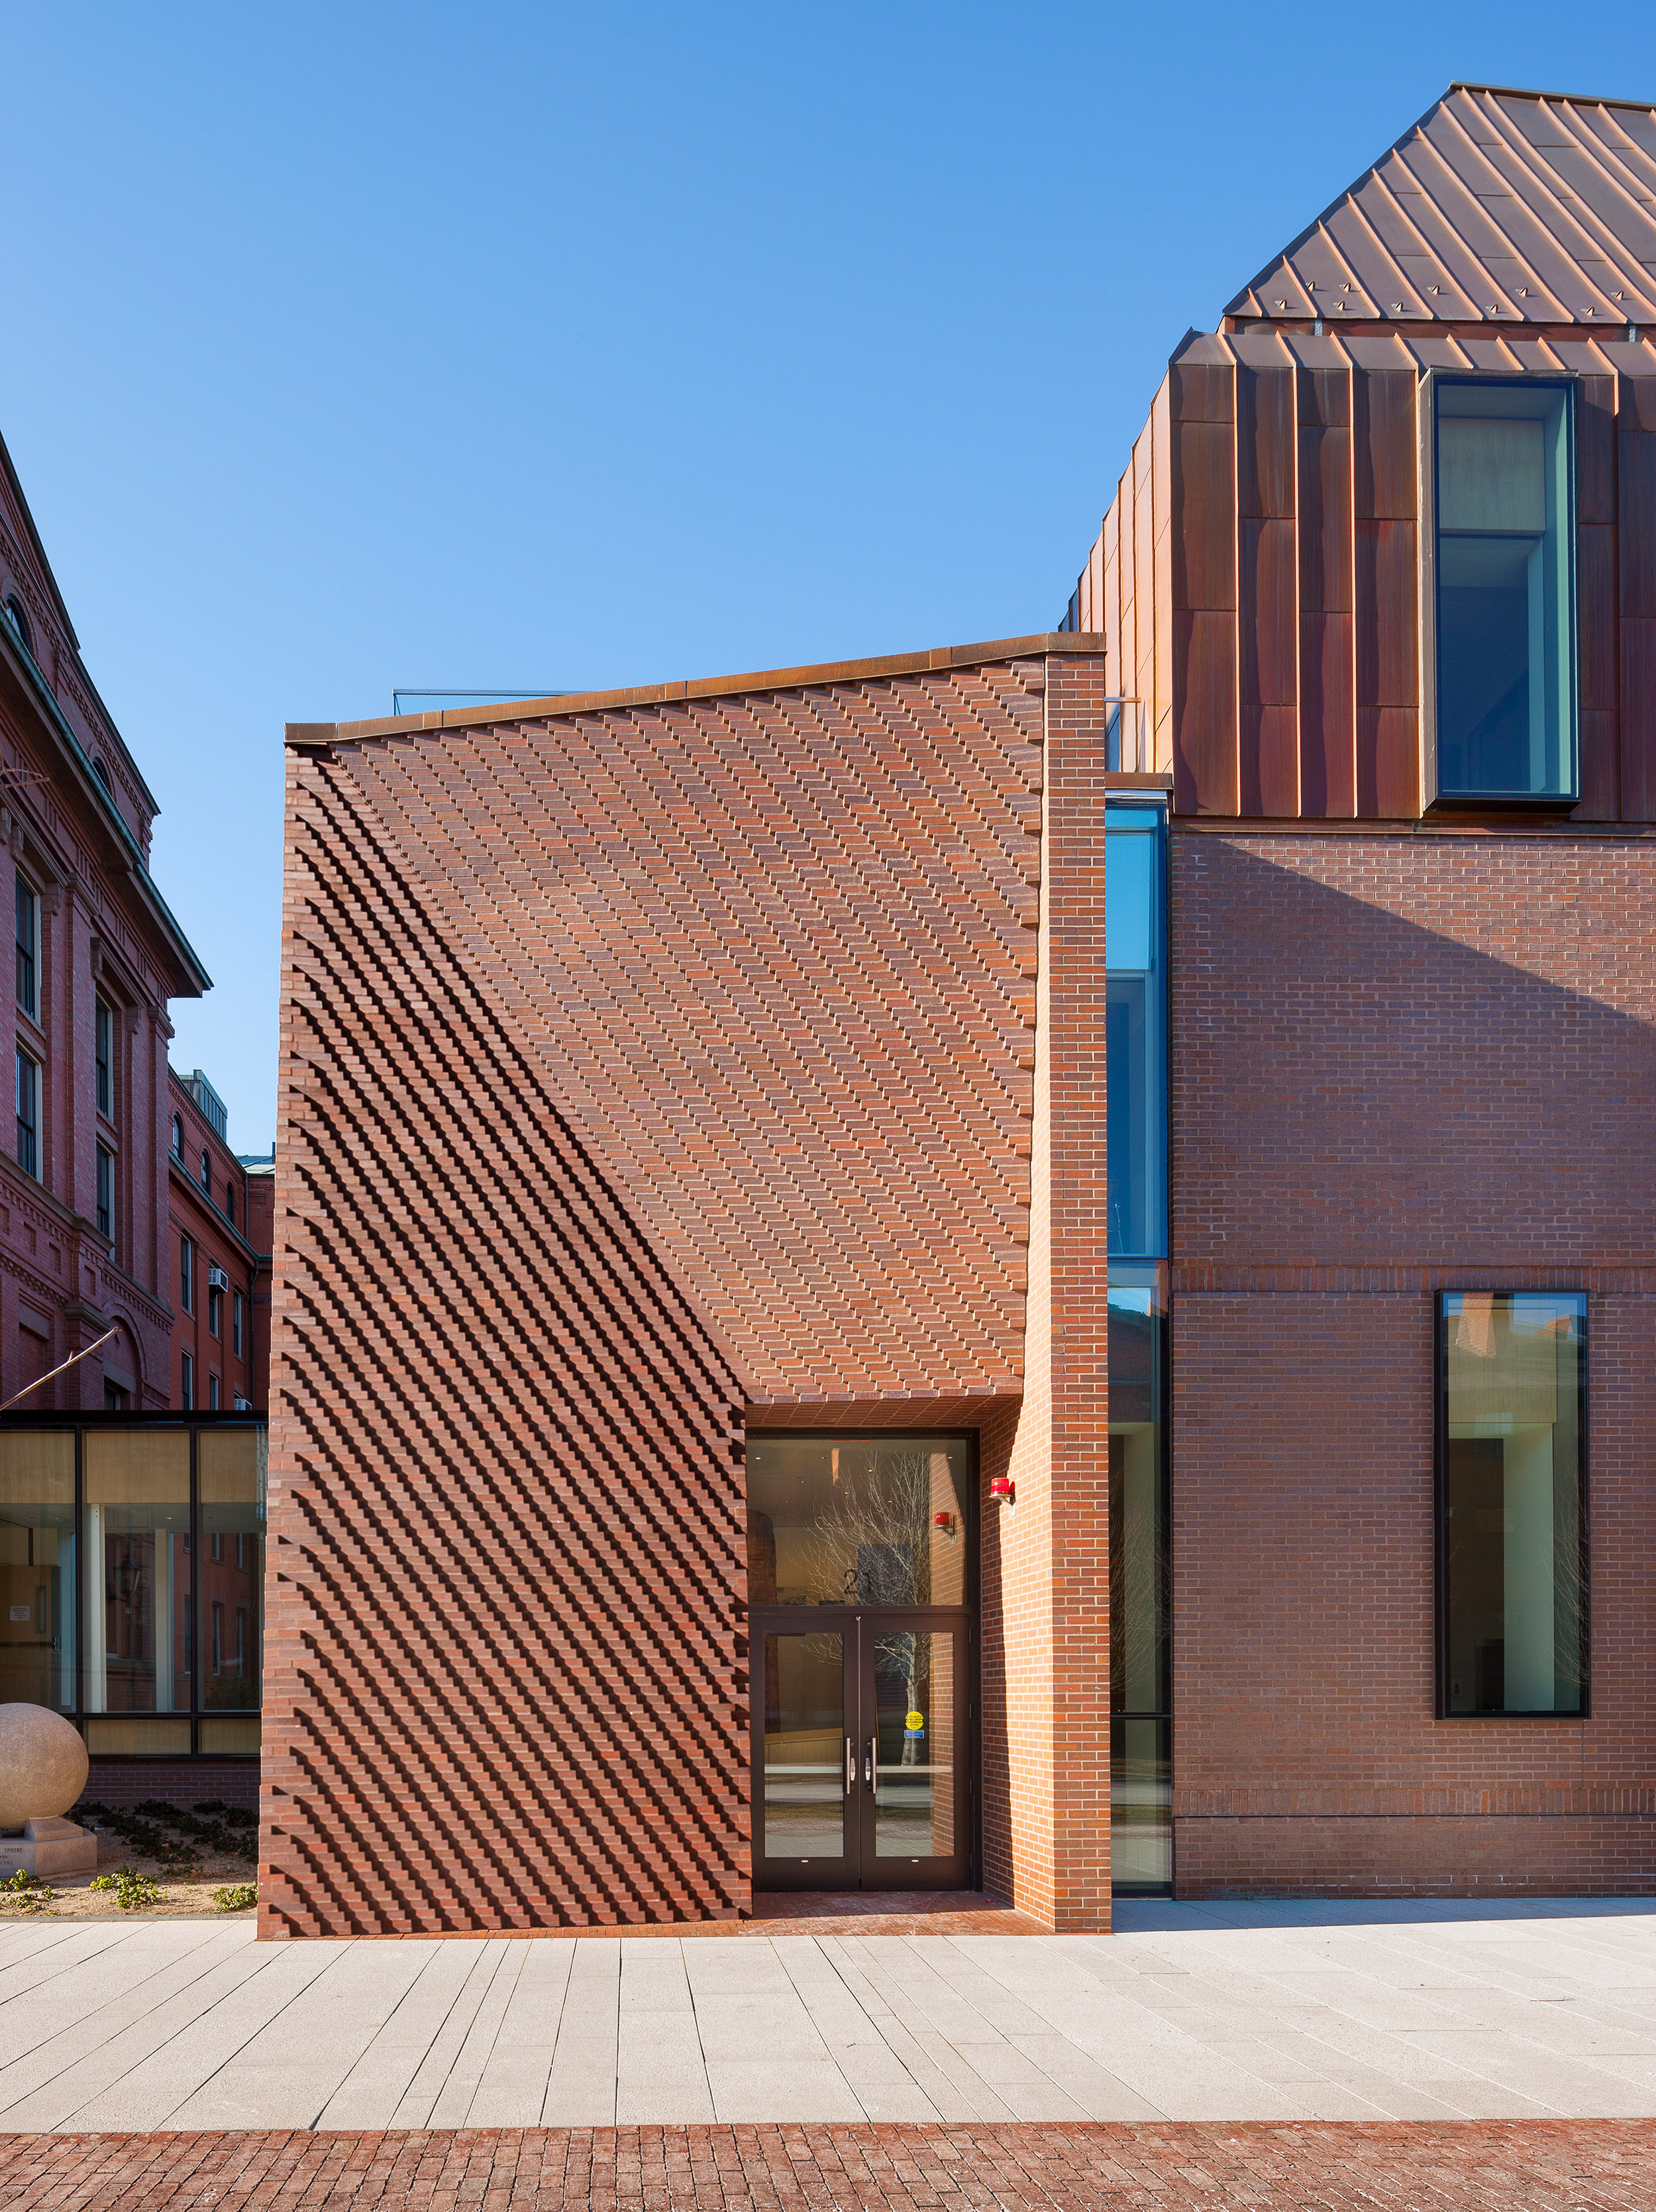 Project: Tozzer Anthropology Building. Architect: Kennedy & Violich Architecture. Photo: John Horner.